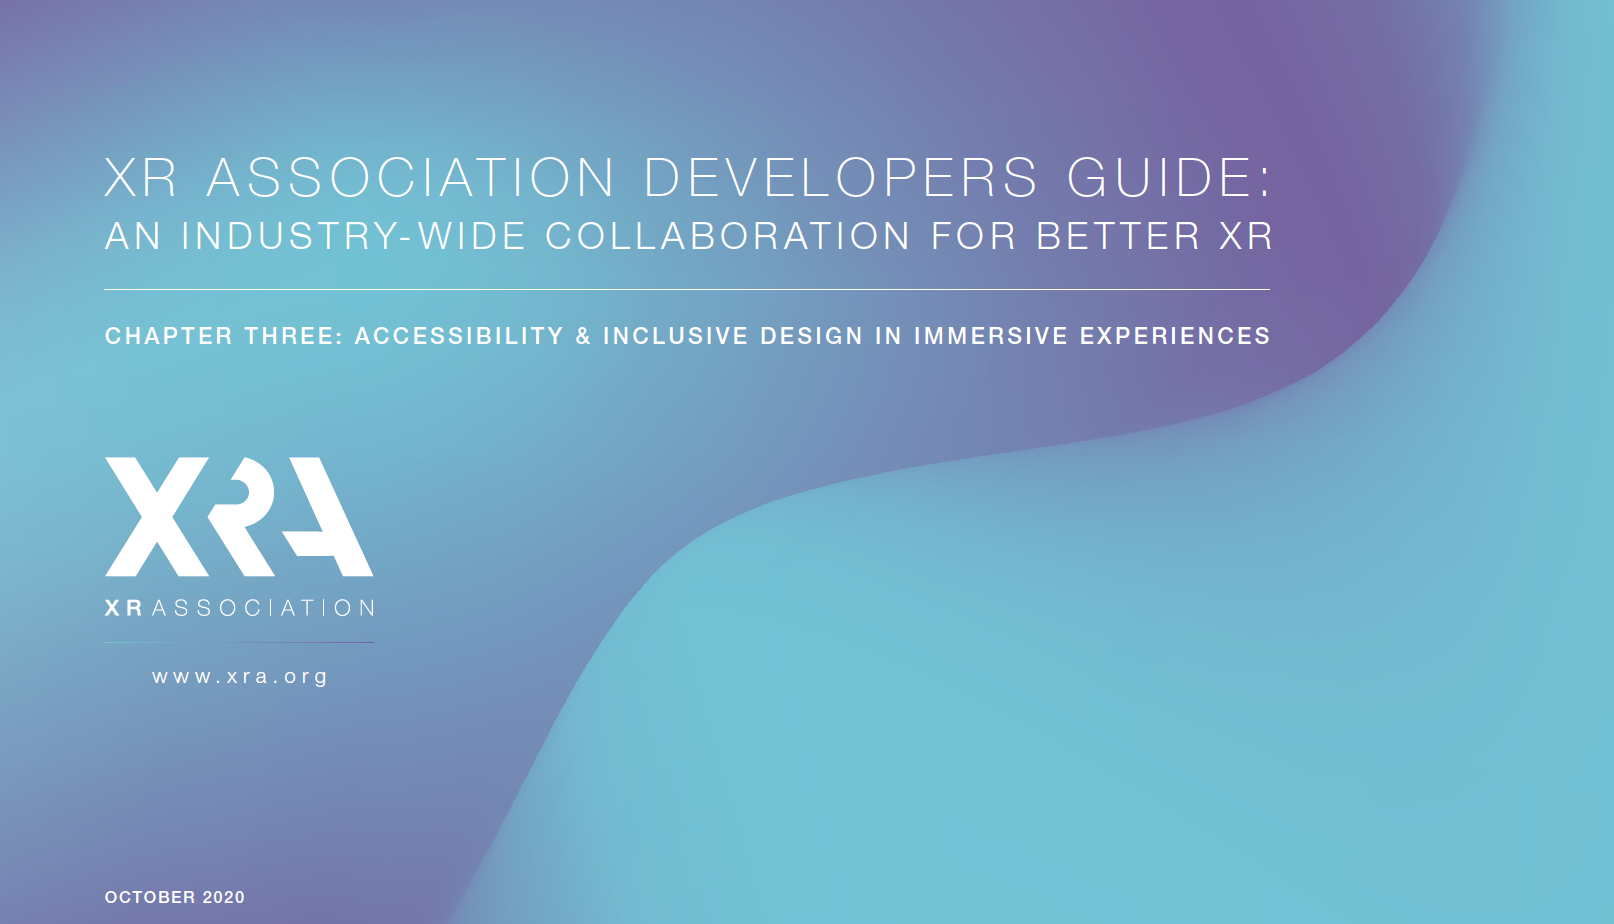 XRA’S DEVELOPERS GUIDE, CHAPTER THREE: Accessibility & Inclusive Design in Immersive Experiences